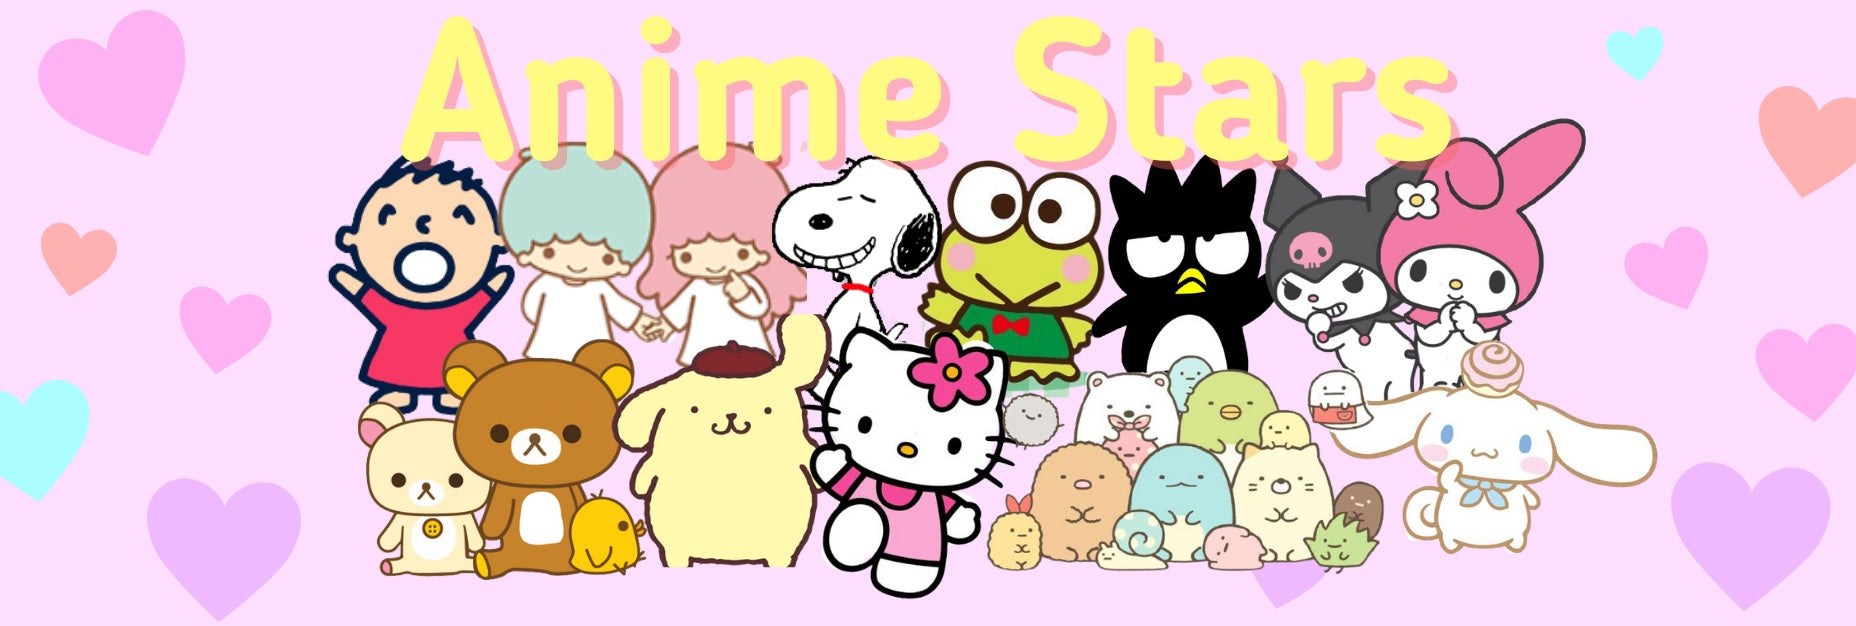 Anime Stars A Cute Shop - Inspired by You For The Cute Soul 